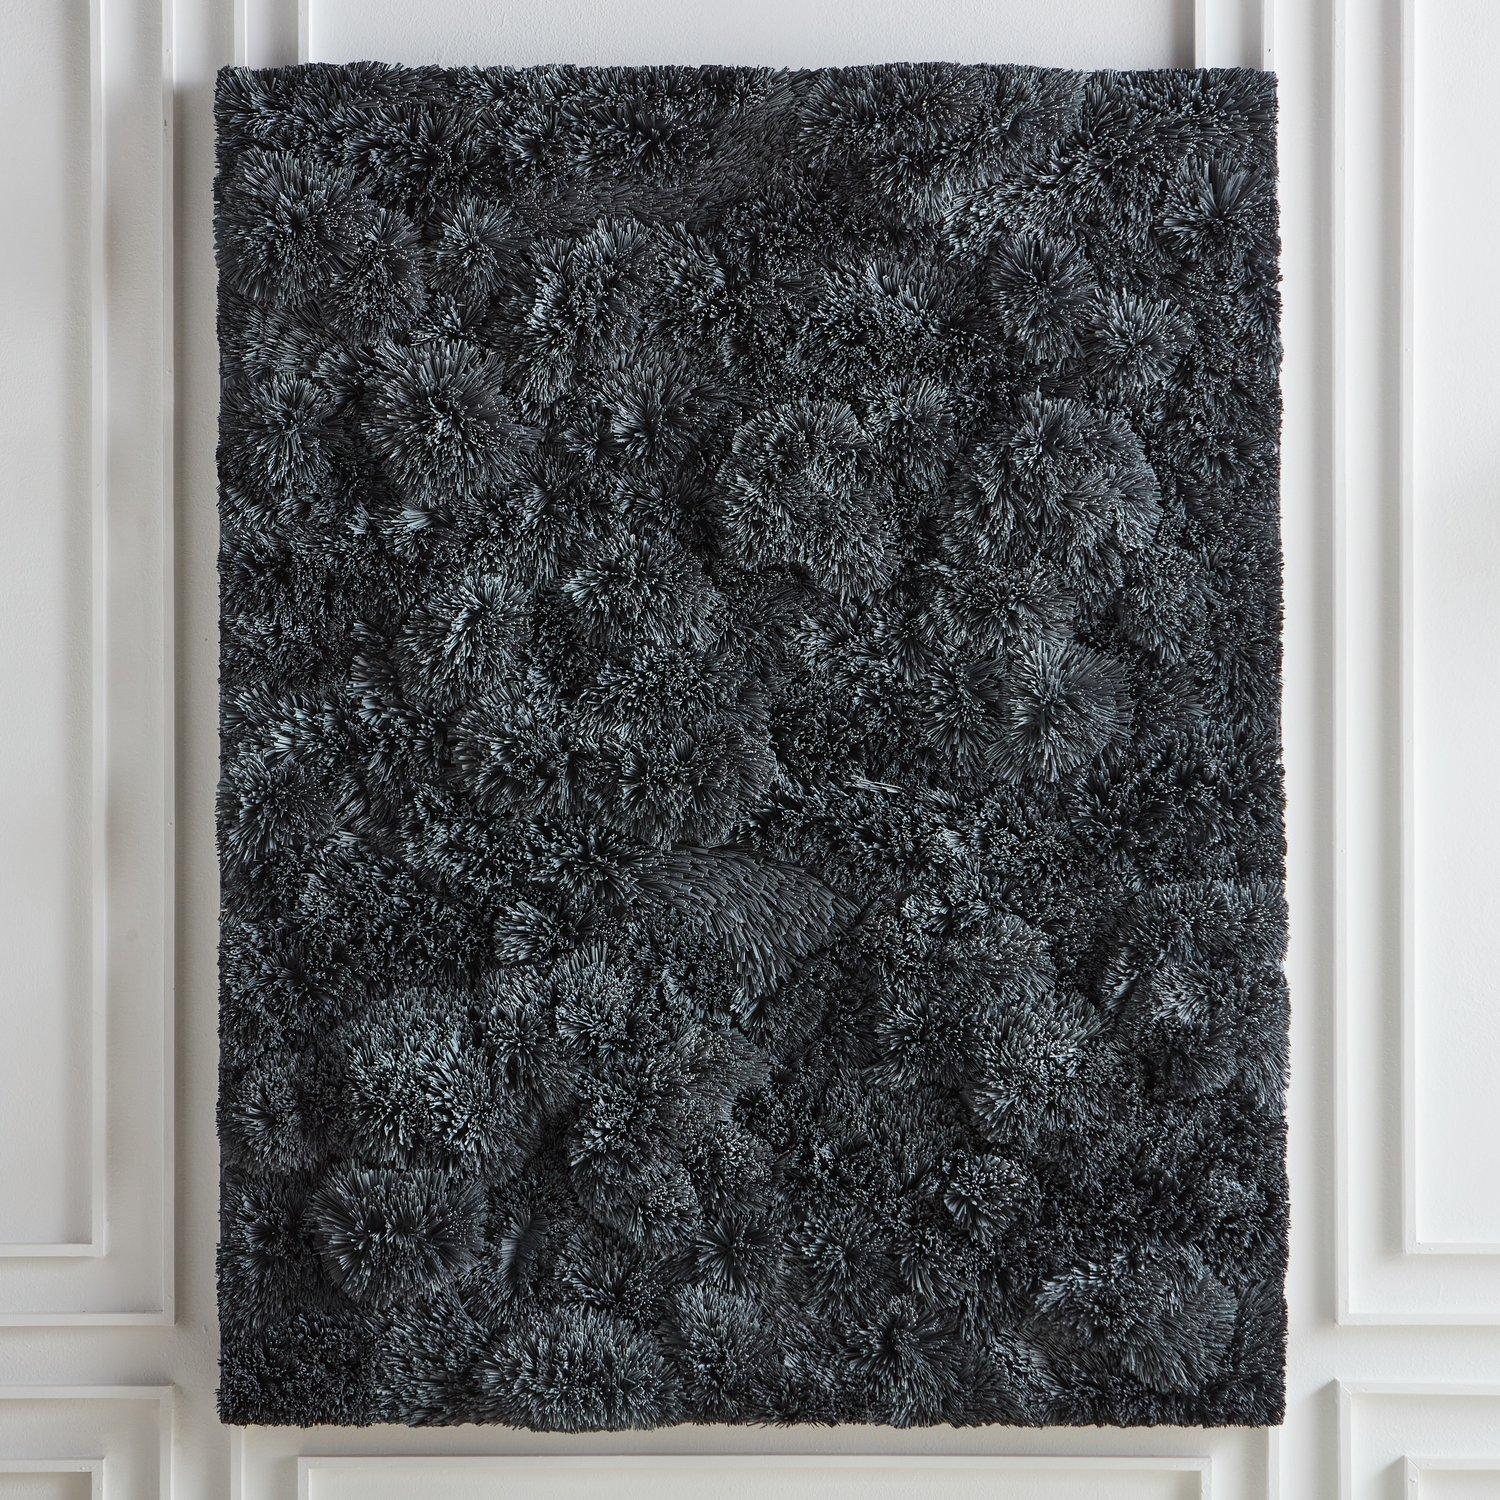 A mixed media wall sculpture by Canadian artist Erin Vincent, 2022. Composed of organic bristles, foam, and acrylic. A monochromatic dark grey piece with subtle nuances in tones. Her work is inspired by the beauty and simplicity of nature and